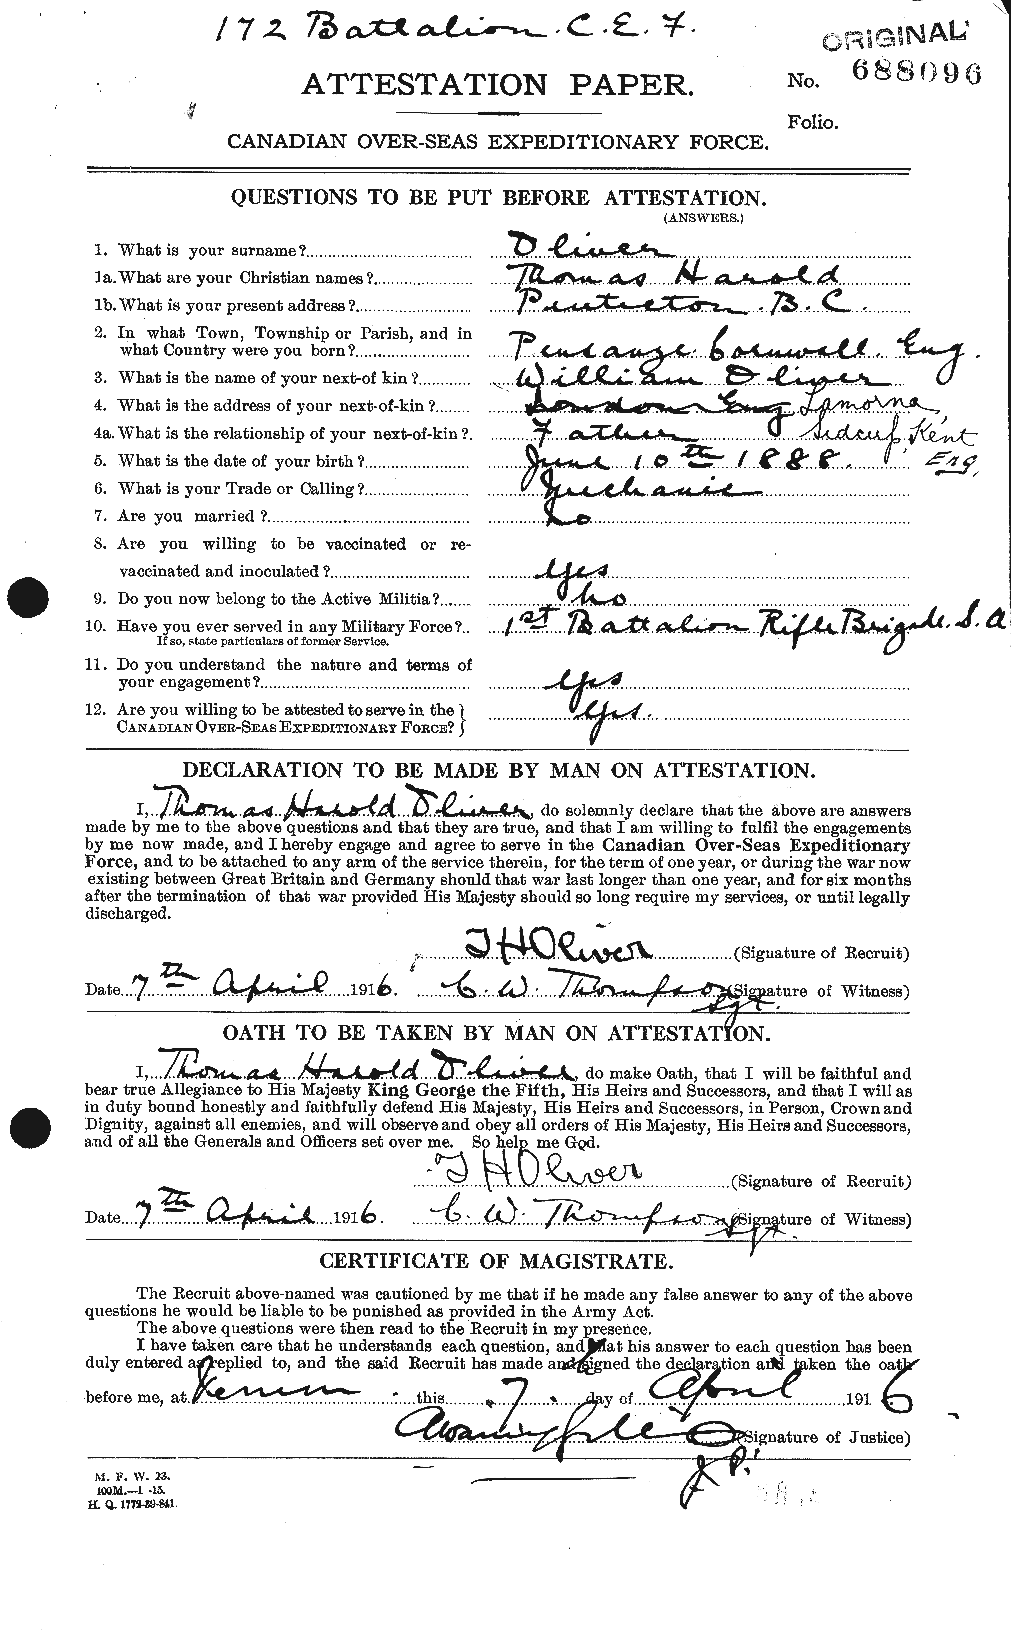 Personnel Records of the First World War - CEF 200523a